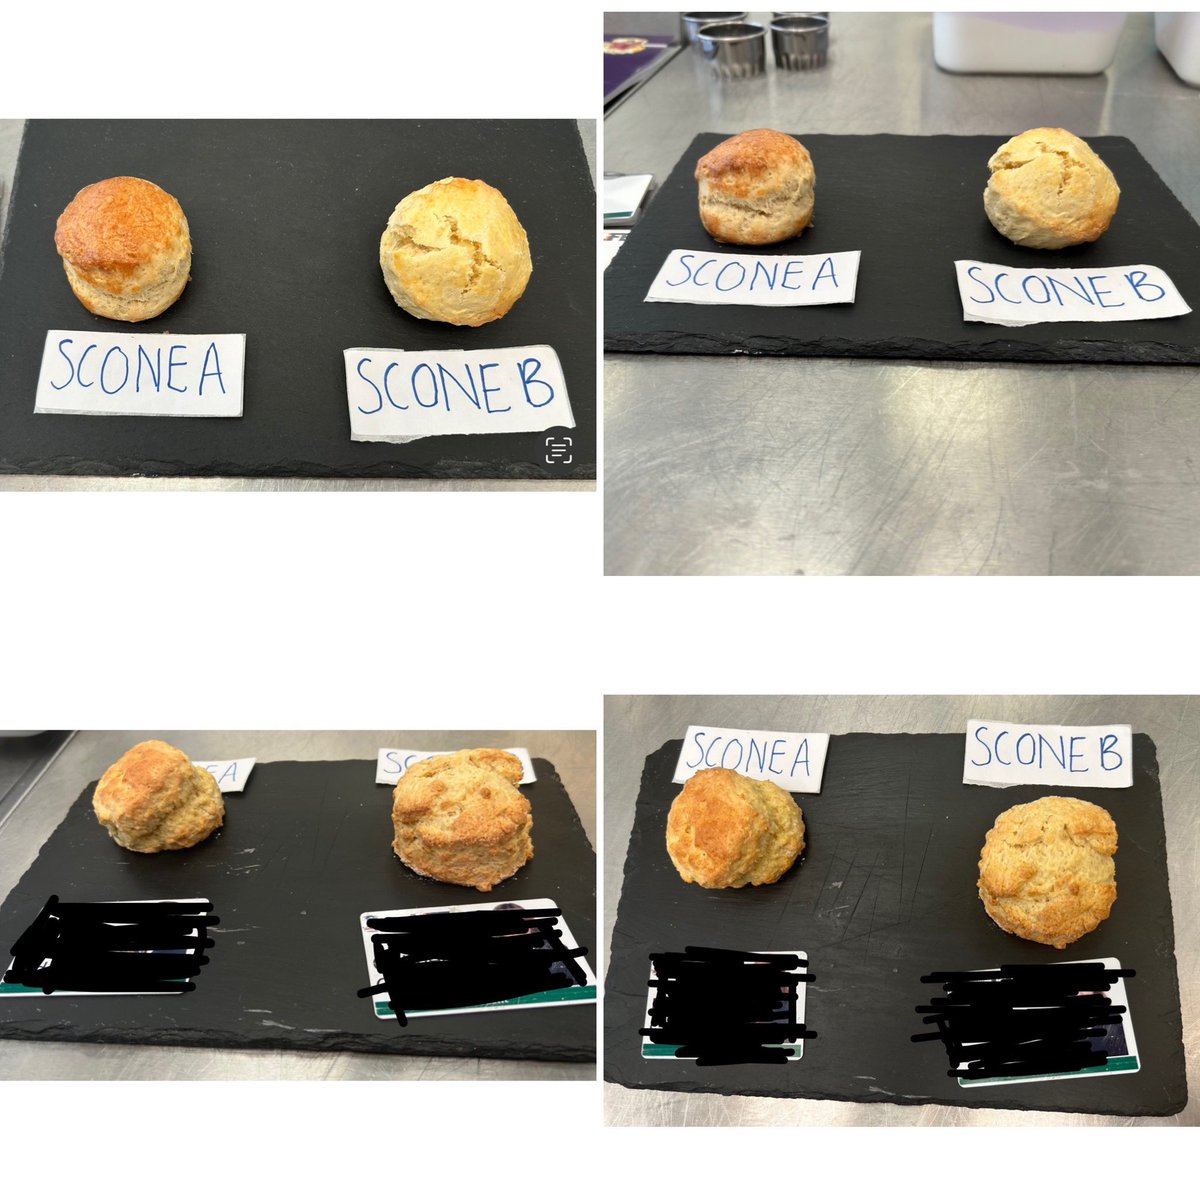 It’s all about food science!! working properties + functions in scones - experiment 2 - gluten - different flour - different protein / gluten content - gluten creates air pockets that trap in CO2 but gluten can effect the shortening process  #food #dtchat #teachfood #dandt